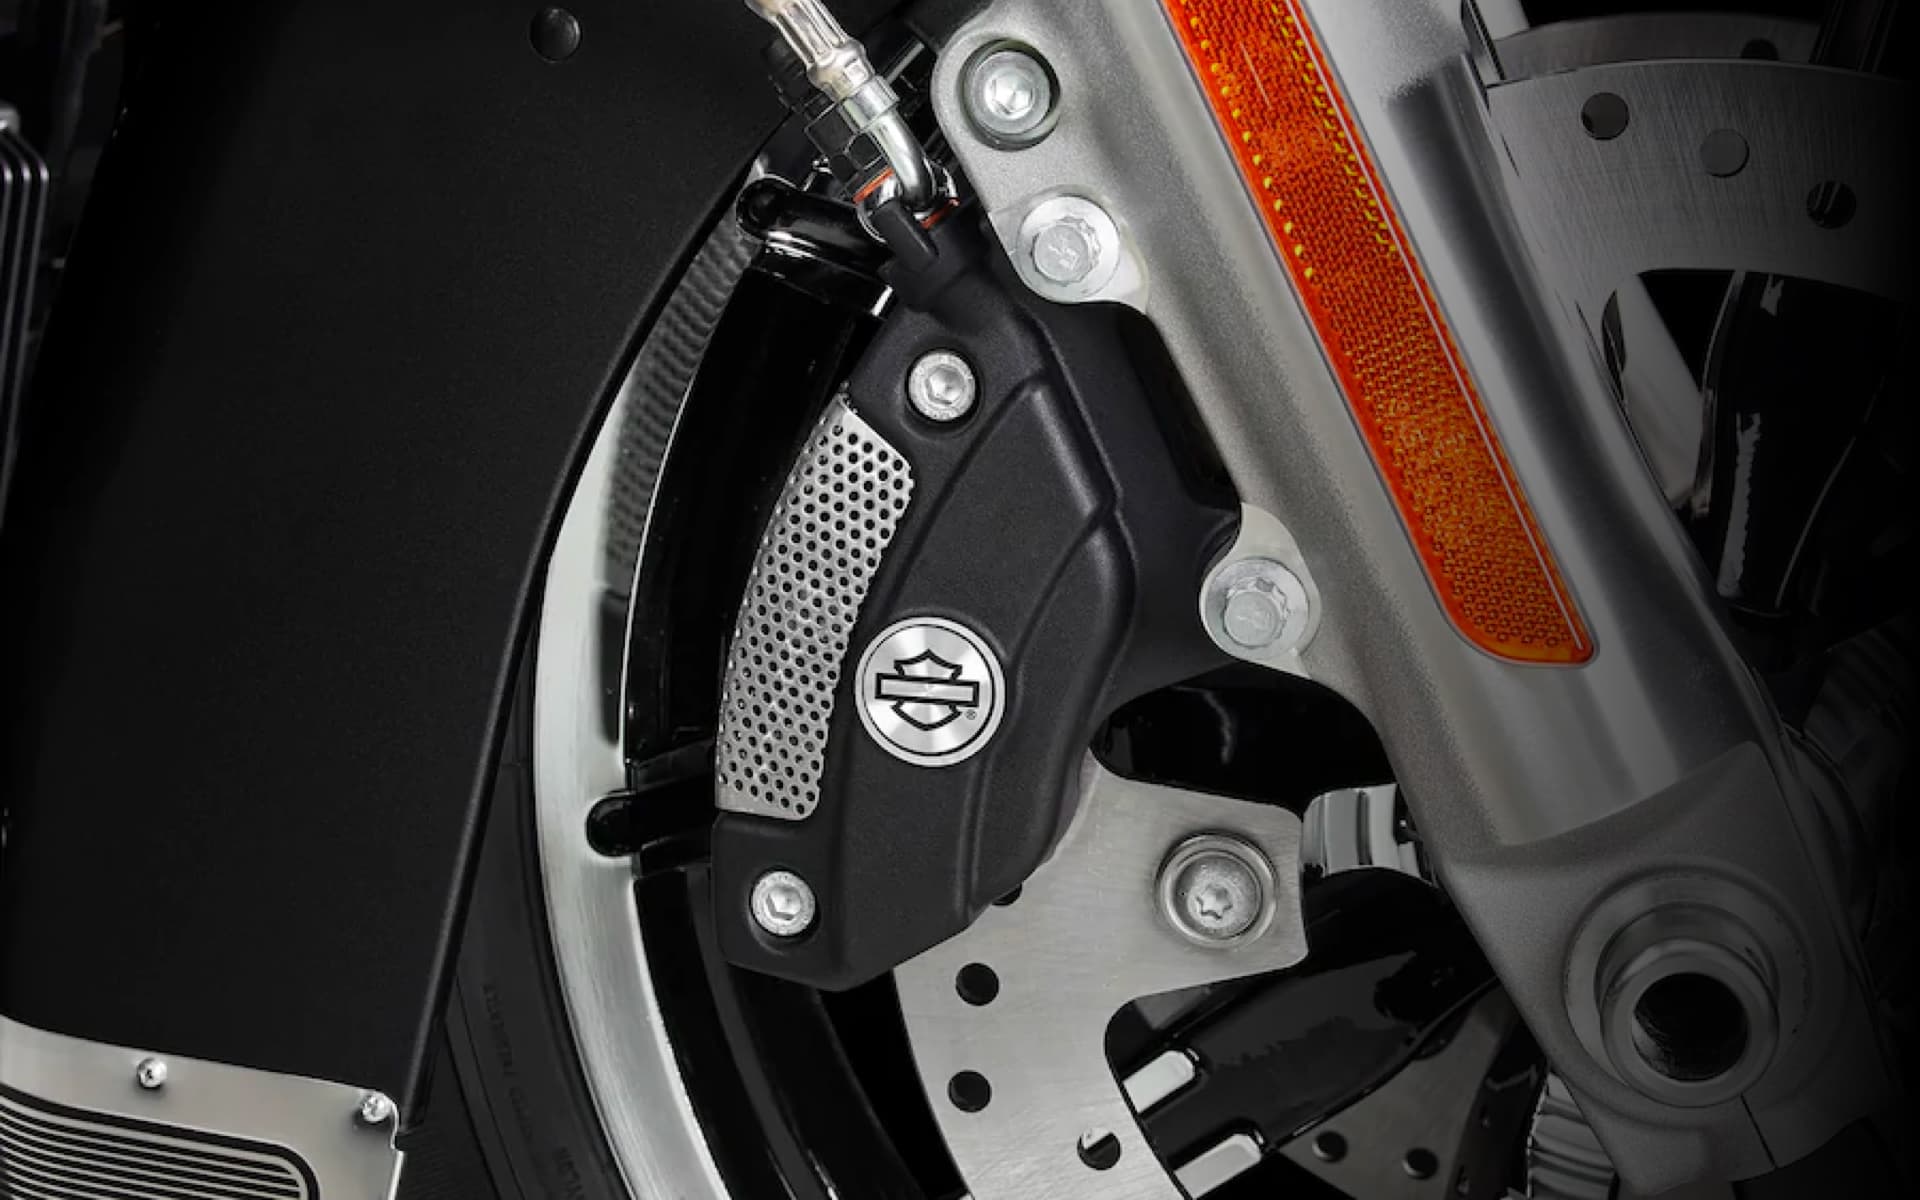 Harley-Davidson Parts and Accessories